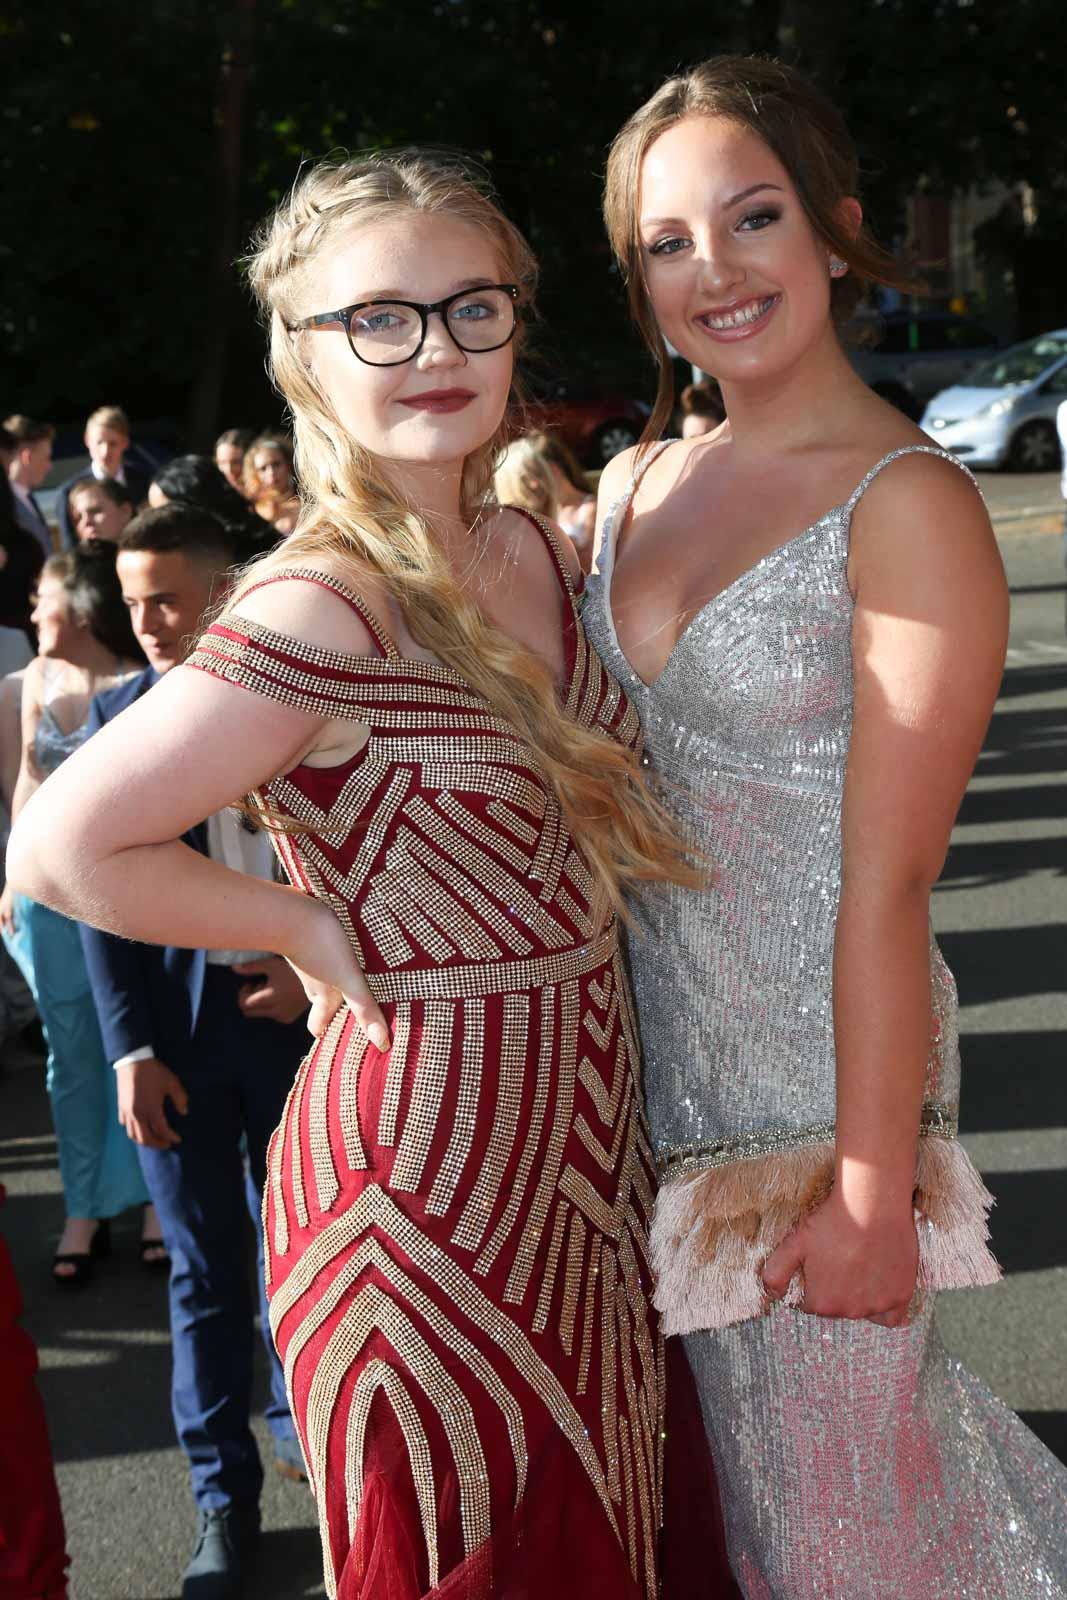 St Aldhelm's Academy Year 11 Prom held at the Queen's Hotel, Bournemouth, on the June 21 2018.  Photos by Richard Crease Photography